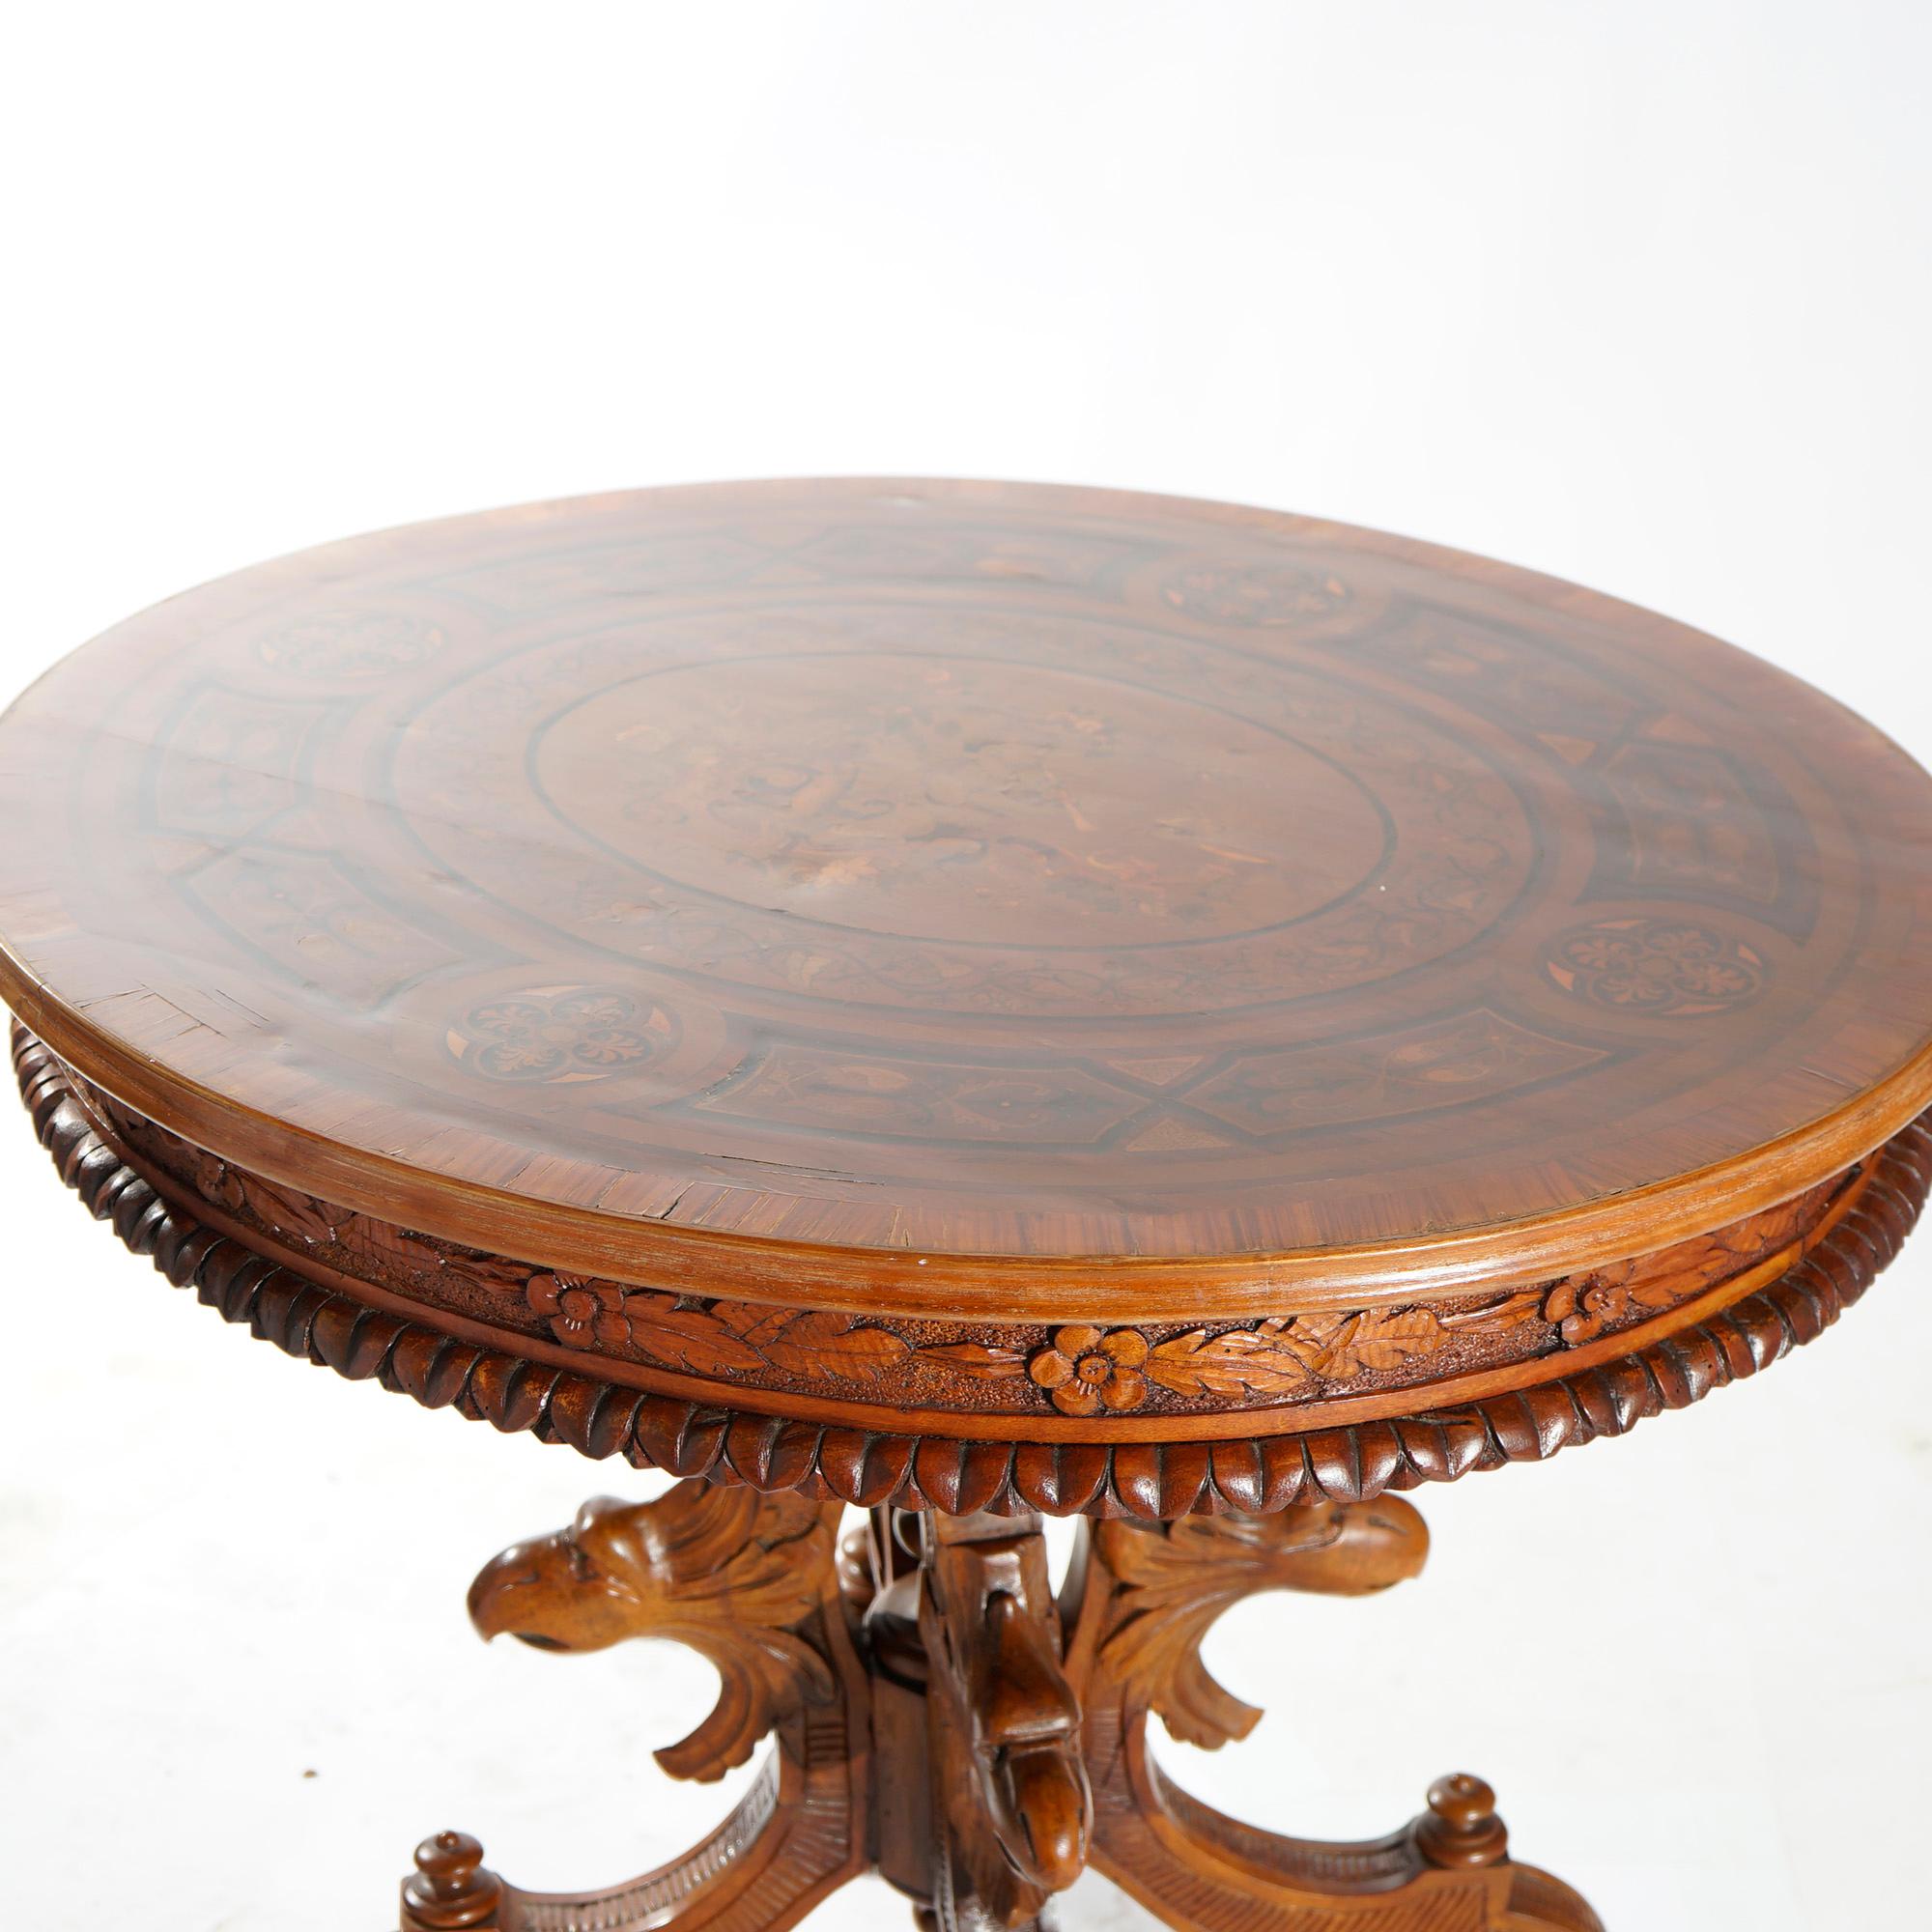 Antique Classical Marquetry Inlaid & Figural Carved Kingwood Center Table 19th C For Sale 1